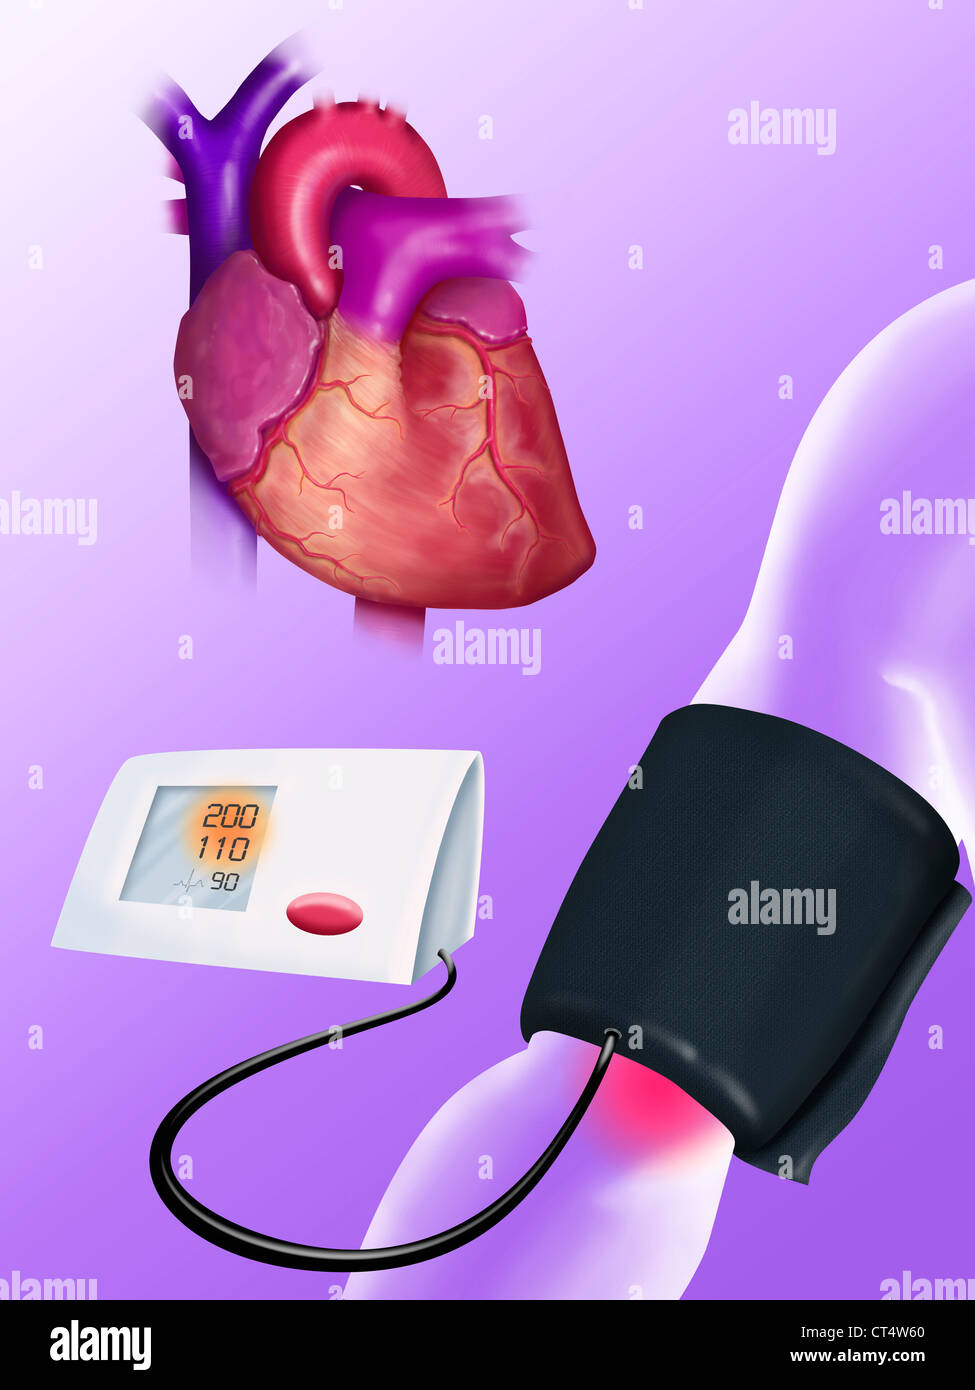 HIGH BLOOD PRESSURE, DRAWING Stock Photo